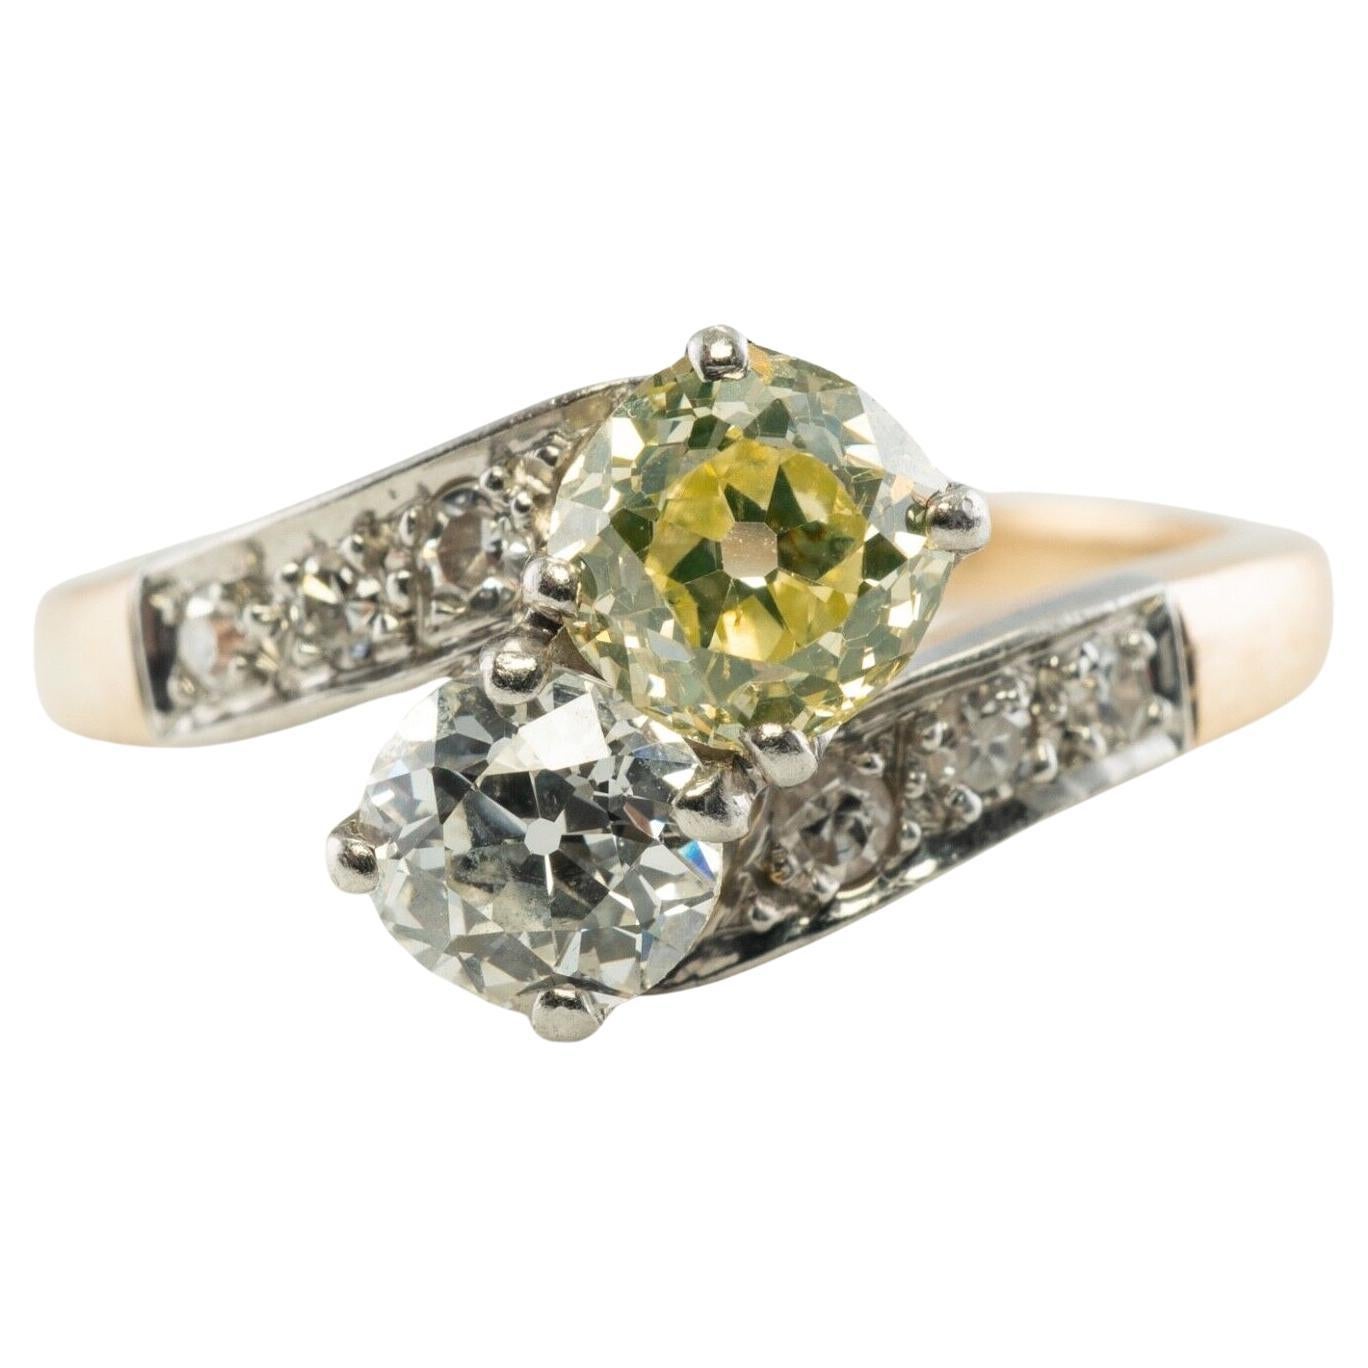 Fancy Yellow & White Diamond Ring 14K Gold Platinum 1.28 TDW Old Mine

This gorgeous Fancy Yellow Diamond & White Diamond Ring circa the 1910s is a finely crafted solid 14K Yellow Gold ring and Platinum ring. 
Two old mine-cut diamonds are set in